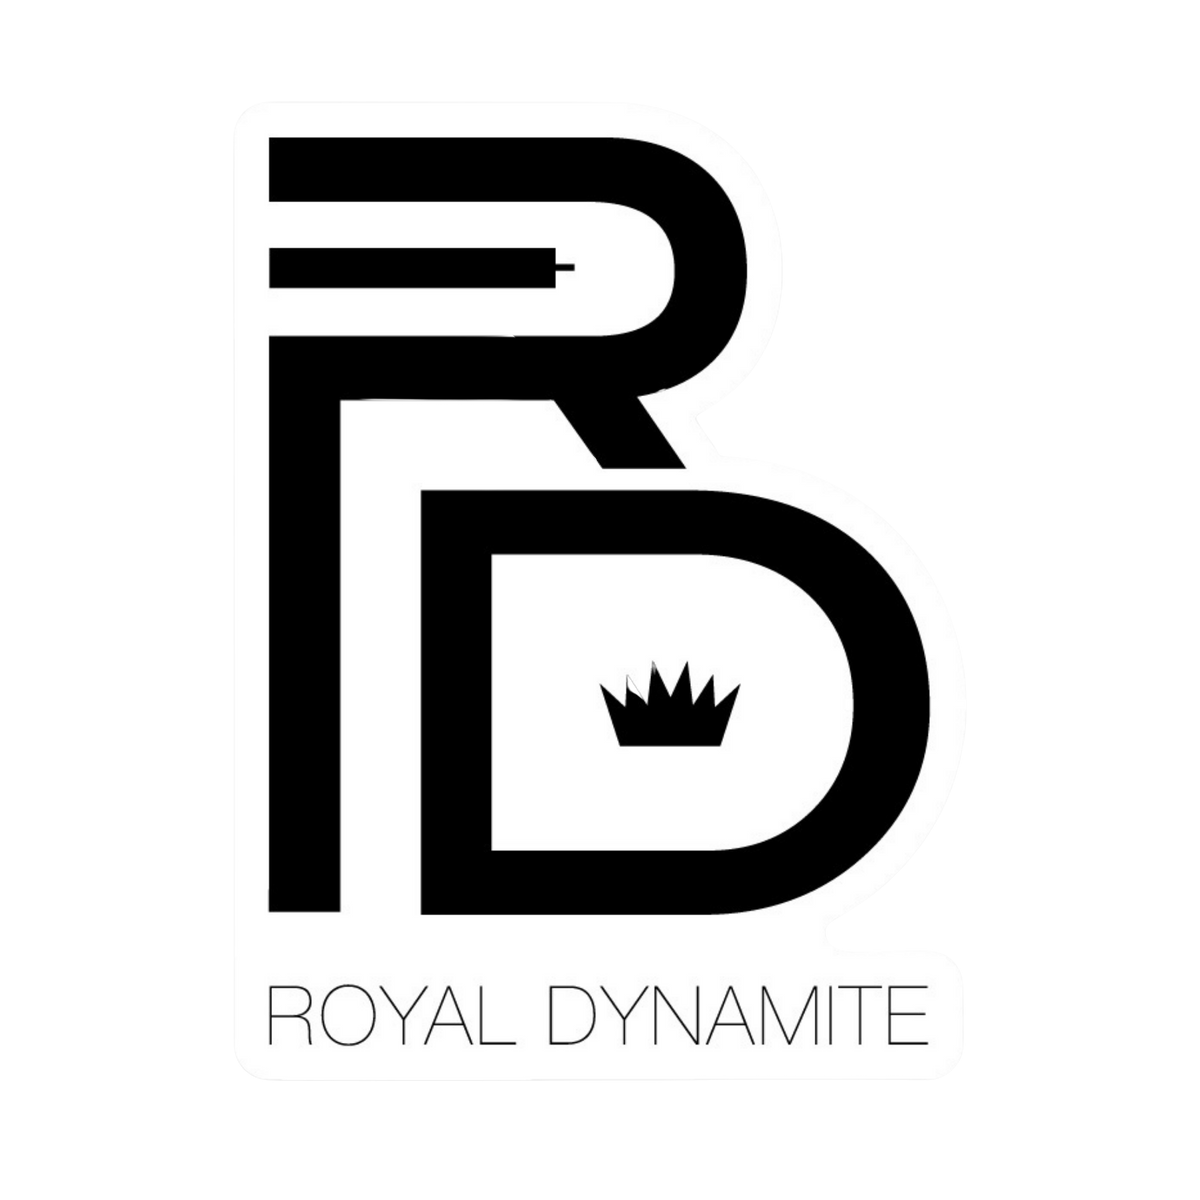 RD ADHESIVE STICKERS - Royal Dynamite